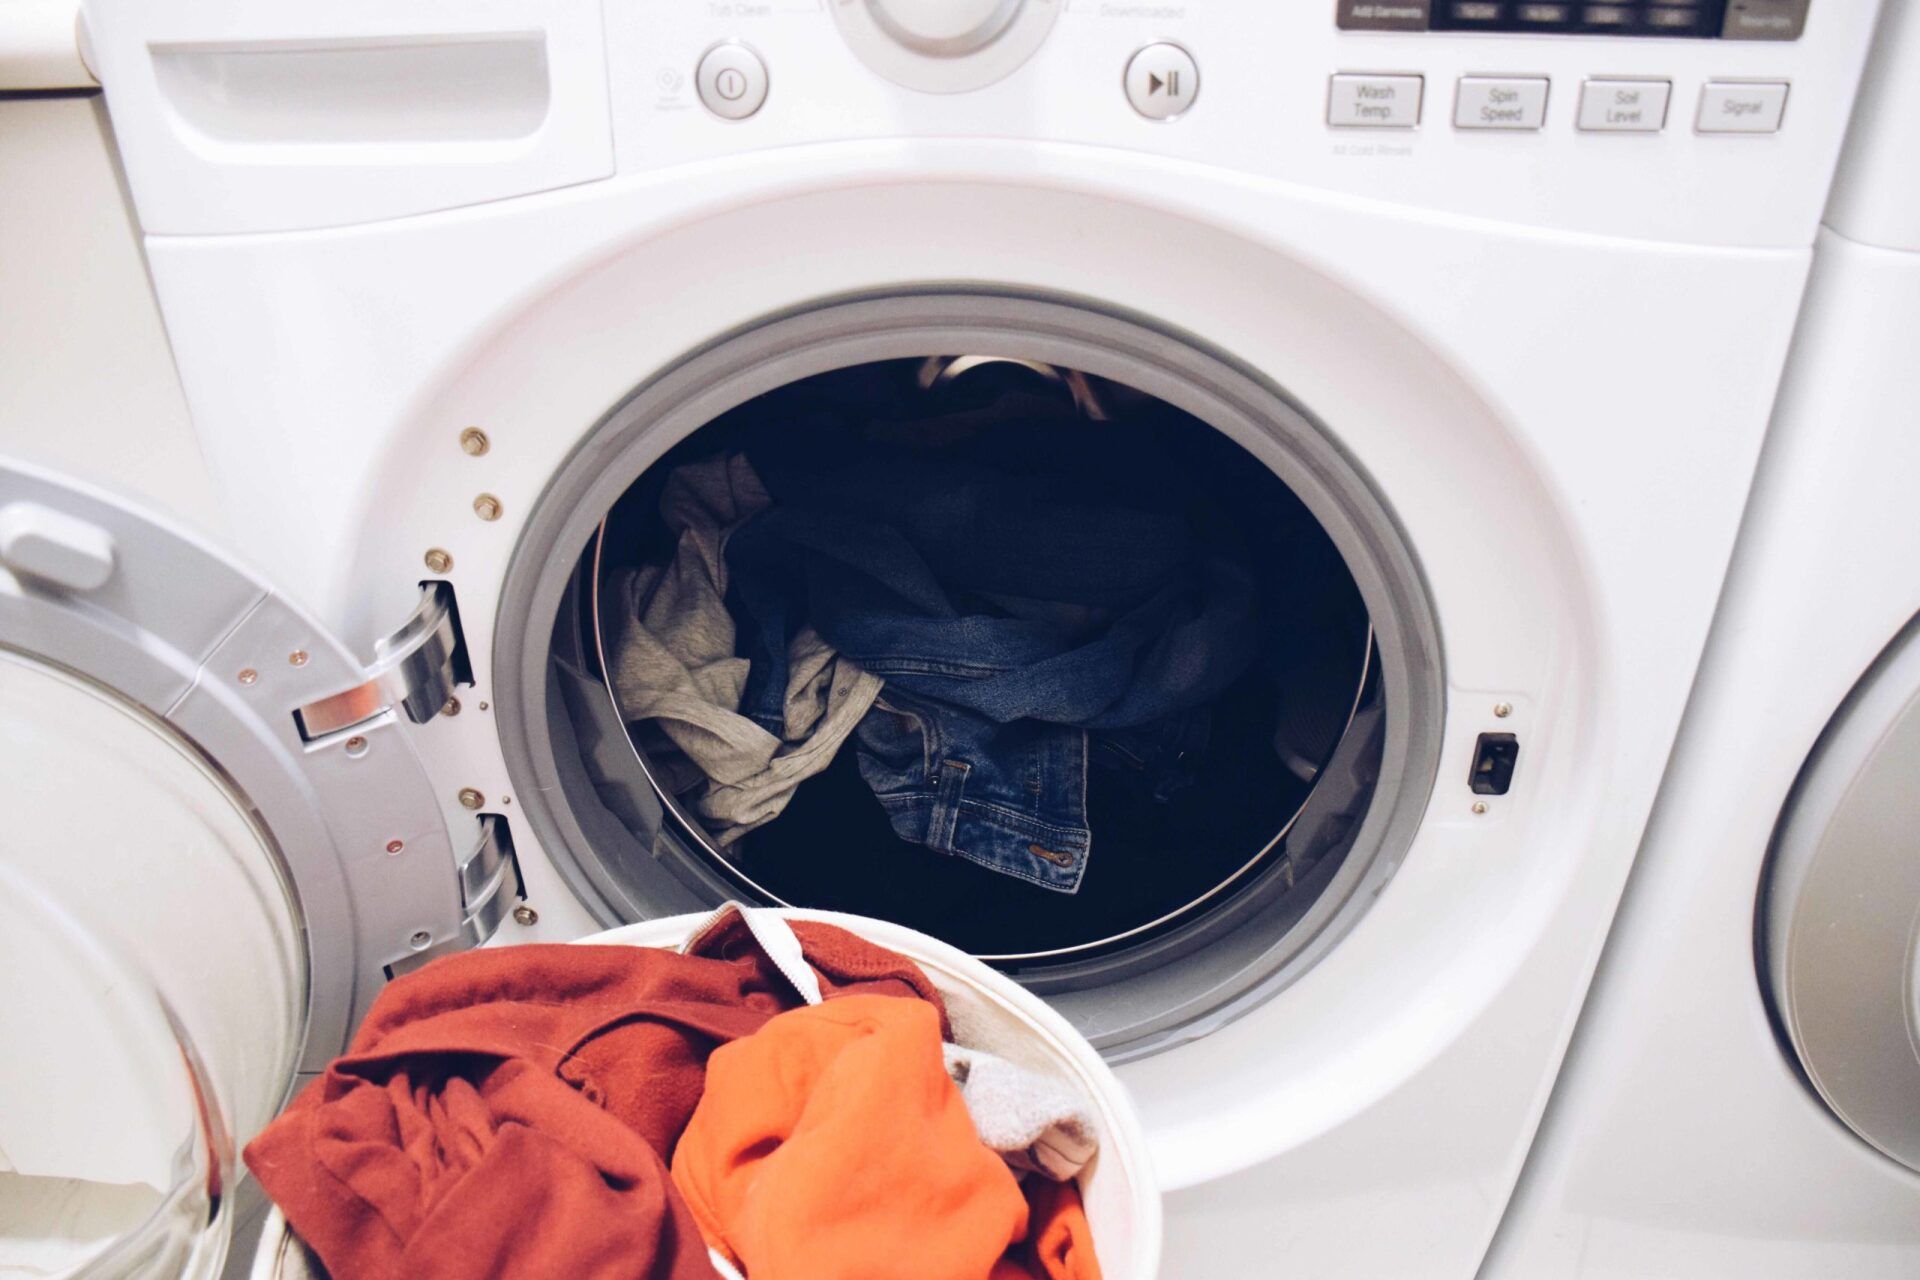 Dryer Repair Services in Hudson, NY